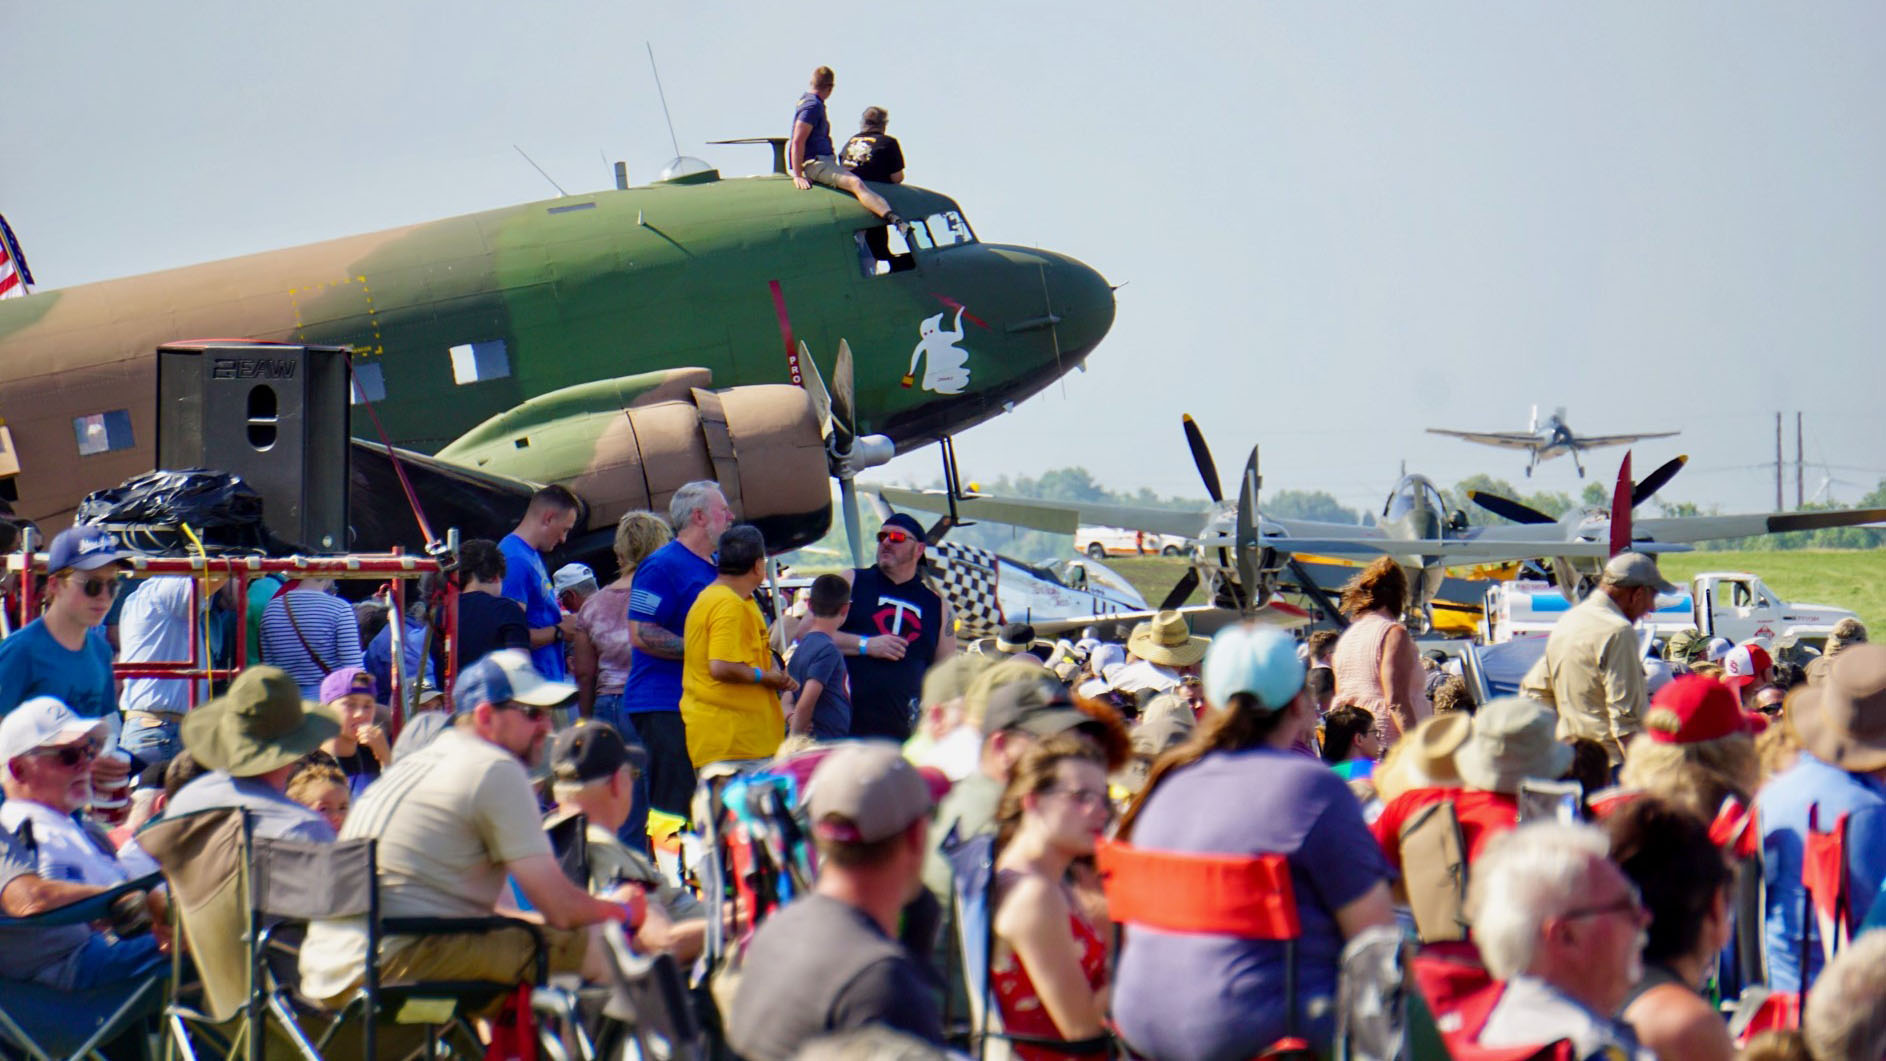 Ray Fagen Memorial Airshow roars back to life AOPA